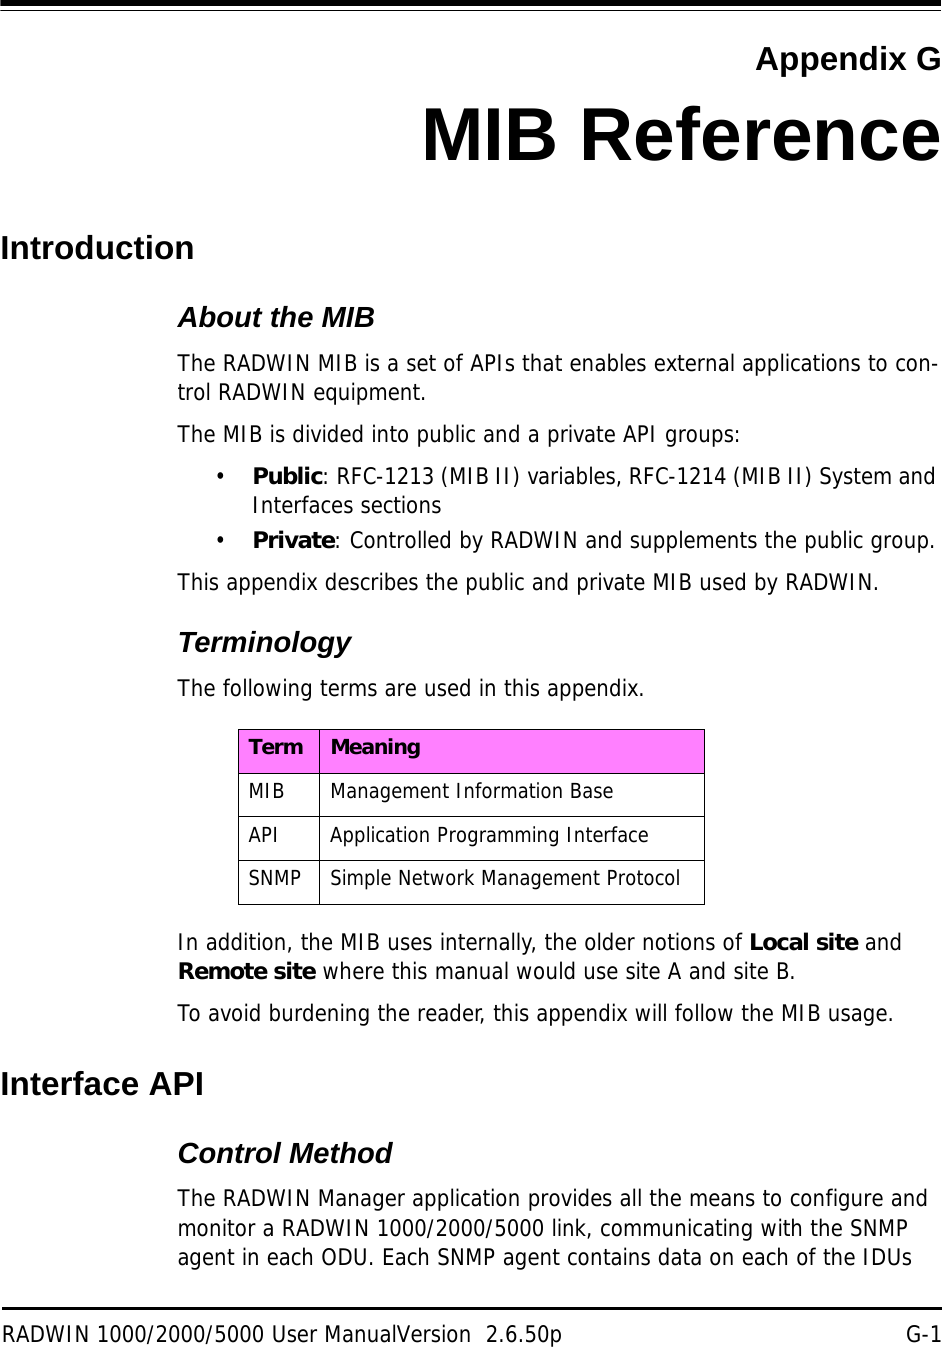 RADWIN 1000/2000/5000 User ManualVersion  2.6.50p G-1Appendix GMIB ReferenceIntroductionAbout the MIBThe RADWIN MIB is a set of APIs that enables external applications to con-trol RADWIN equipment.The MIB is divided into public and a private API groups:•Public: RFC-1213 (MIB II) variables, RFC-1214 (MIB II) System and Interfaces sections•Private: Controlled by RADWIN and supplements the public group.This appendix describes the public and private MIB used by RADWIN.TerminologyThe following terms are used in this appendix.In addition, the MIB uses internally, the older notions of Local site and Remote site where this manual would use site A and site B.To avoid burdening the reader, this appendix will follow the MIB usage.Interface APIControl MethodThe RADWIN Manager application provides all the means to configure and monitor a RADWIN 1000/2000/5000 link, communicating with the SNMP agent in each ODU. Each SNMP agent contains data on each of the IDUs Term MeaningMIB Management Information BaseAPI Application Programming InterfaceSNMP Simple Network Management Protocol